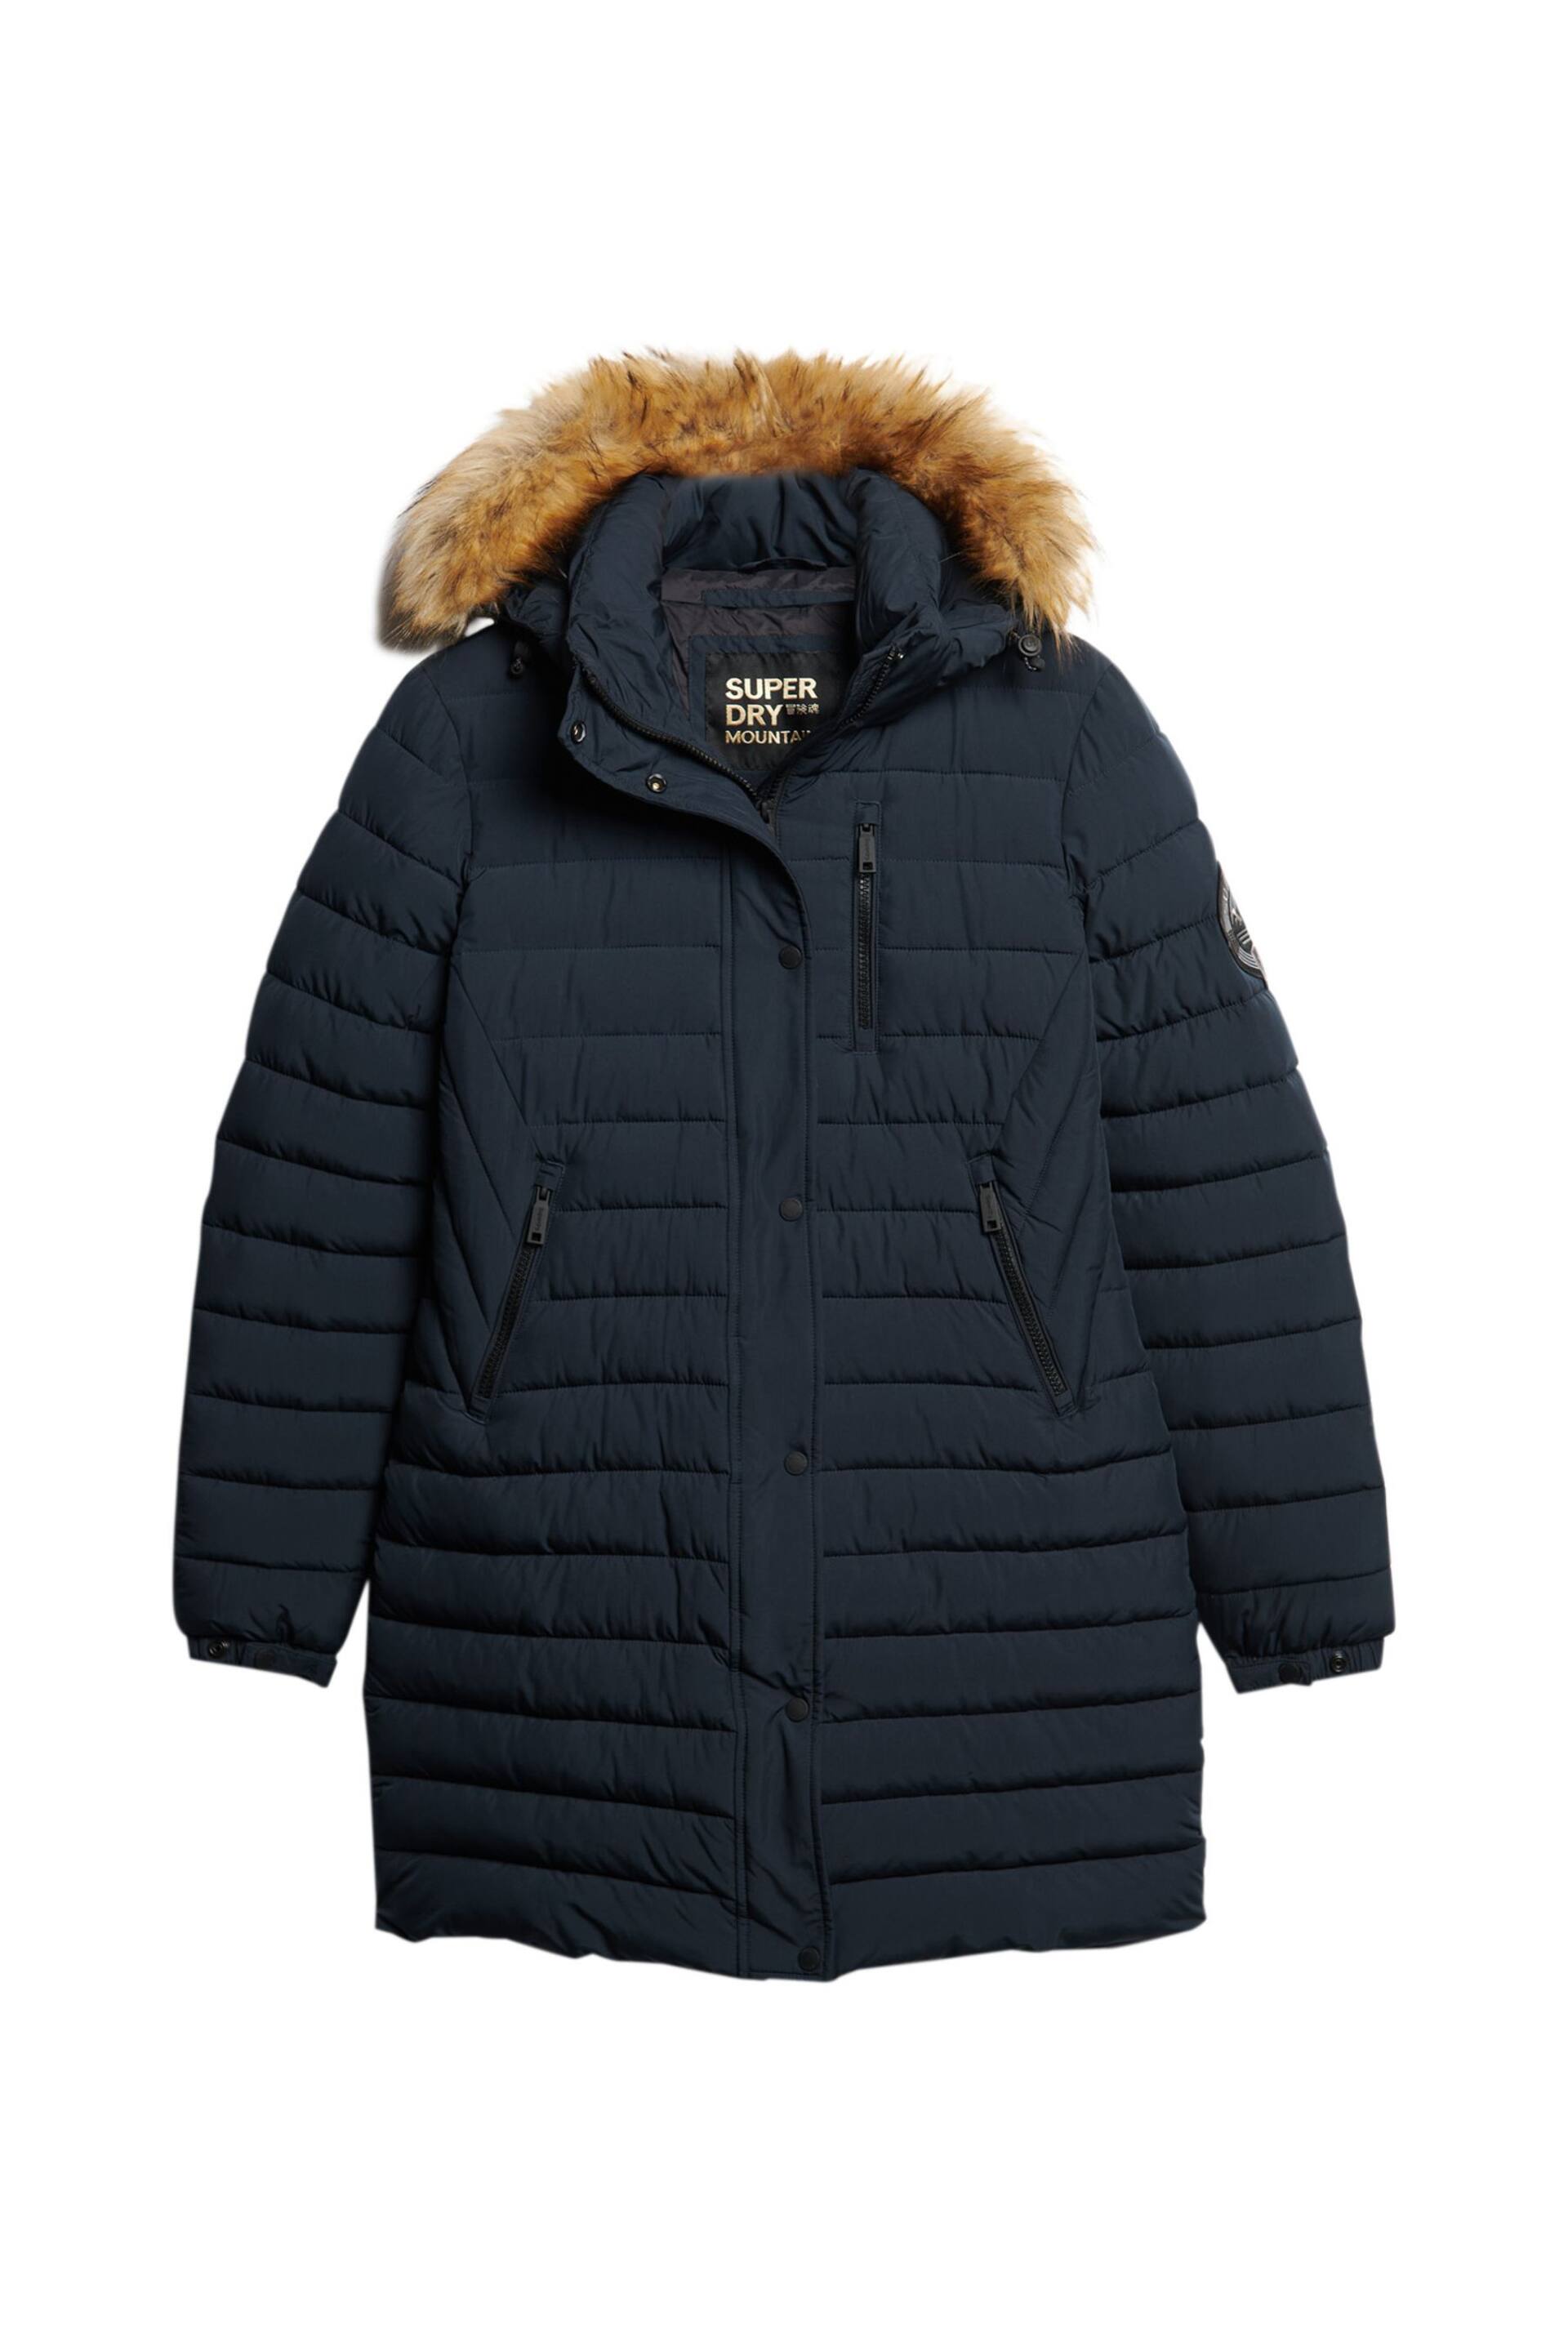 Superdry Blue Fuji Hooded Mid Length Puffer Jacket - Image 5 of 7